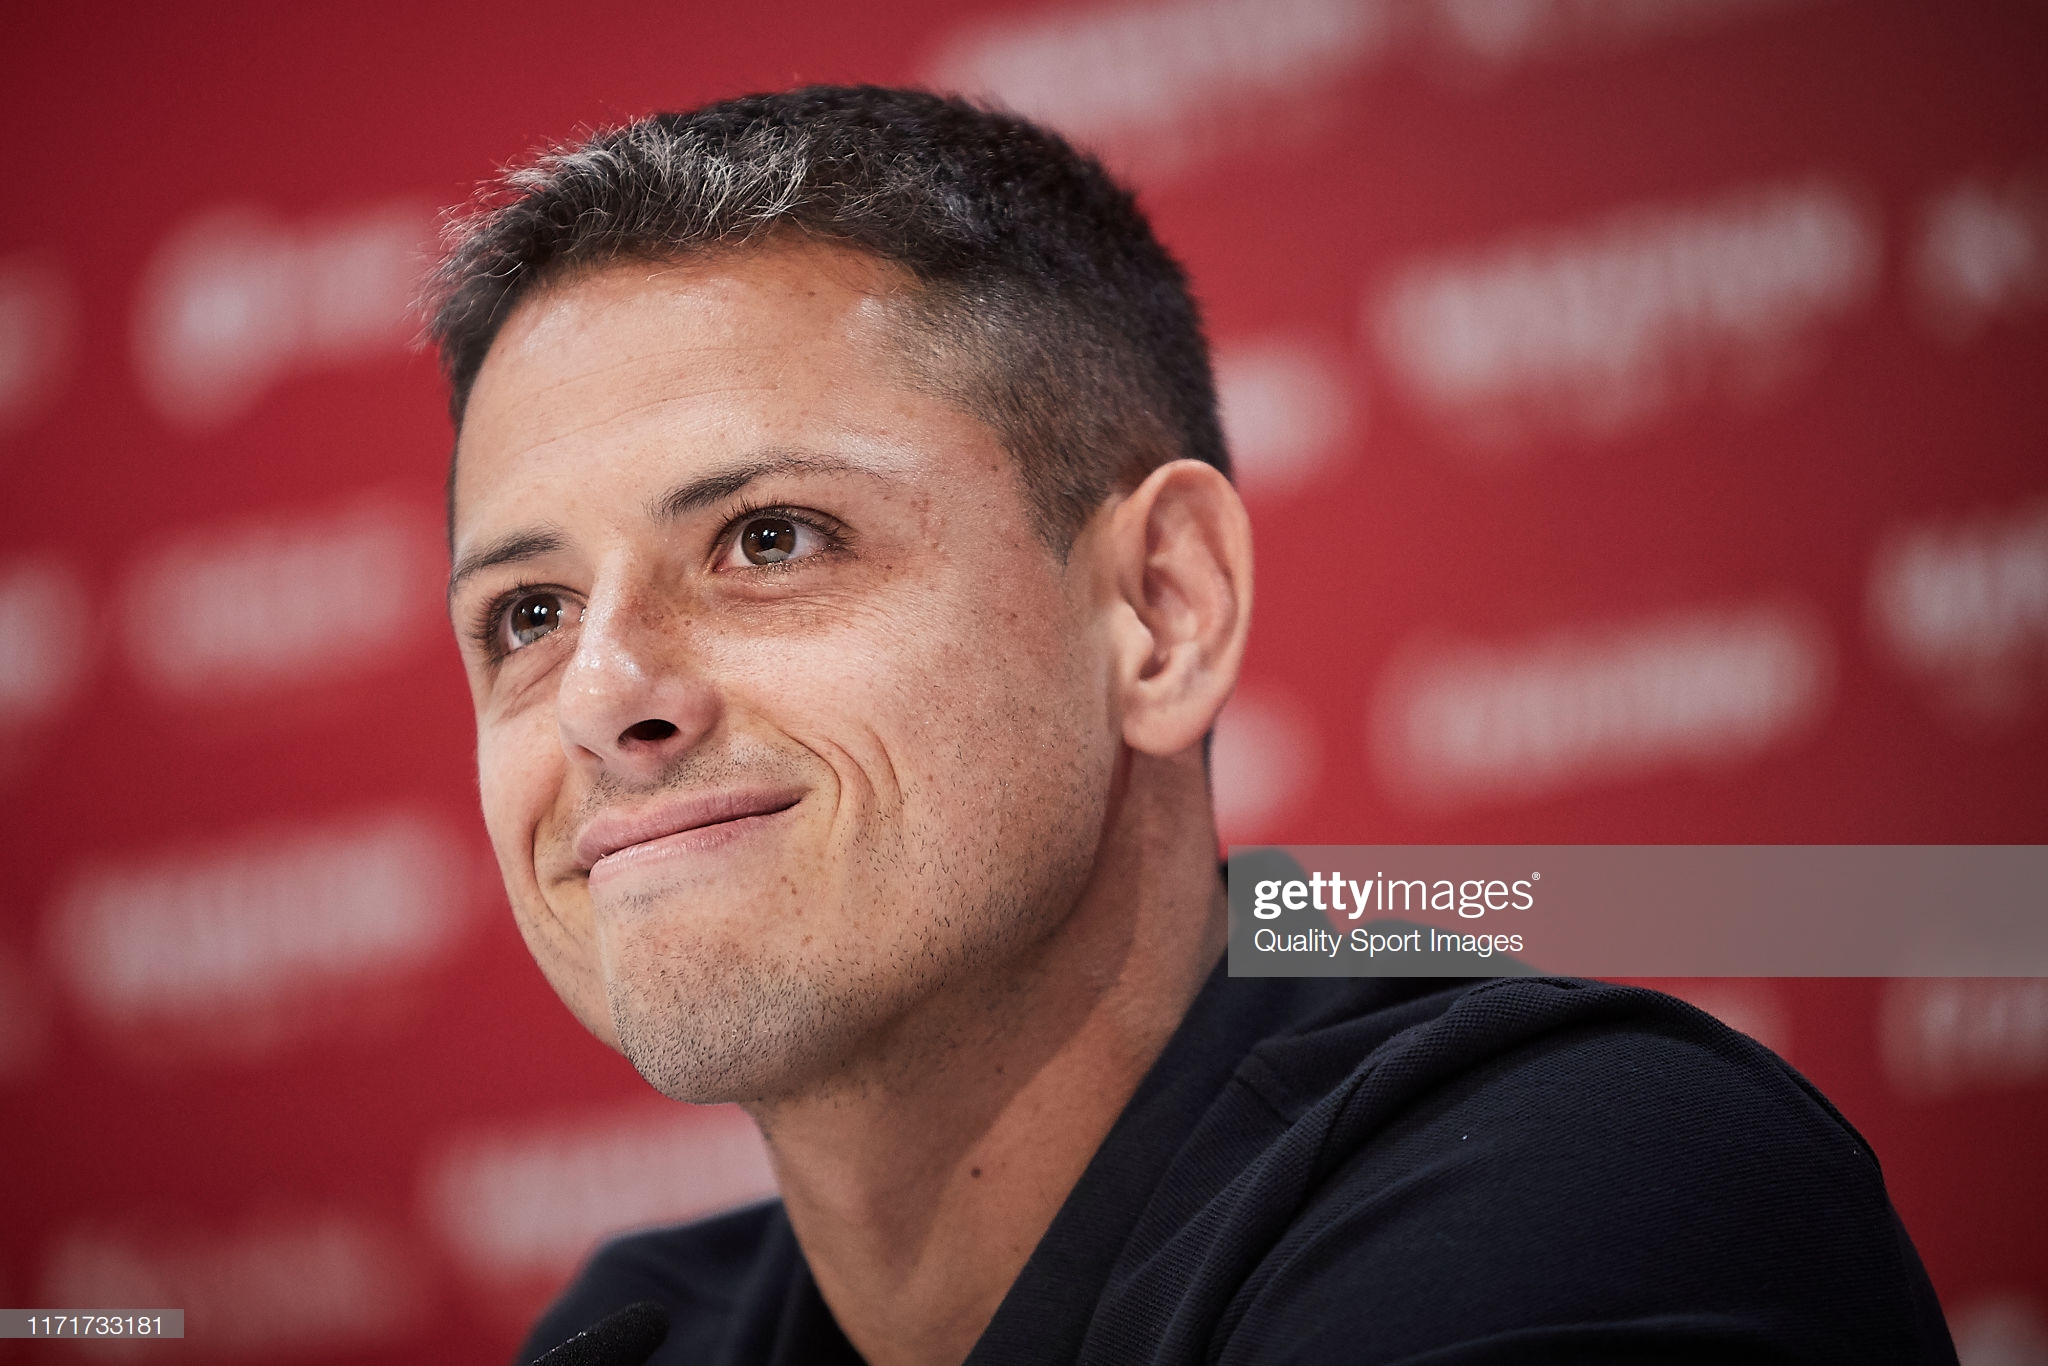 gettyimages-1171733181-2048x2048.jpg